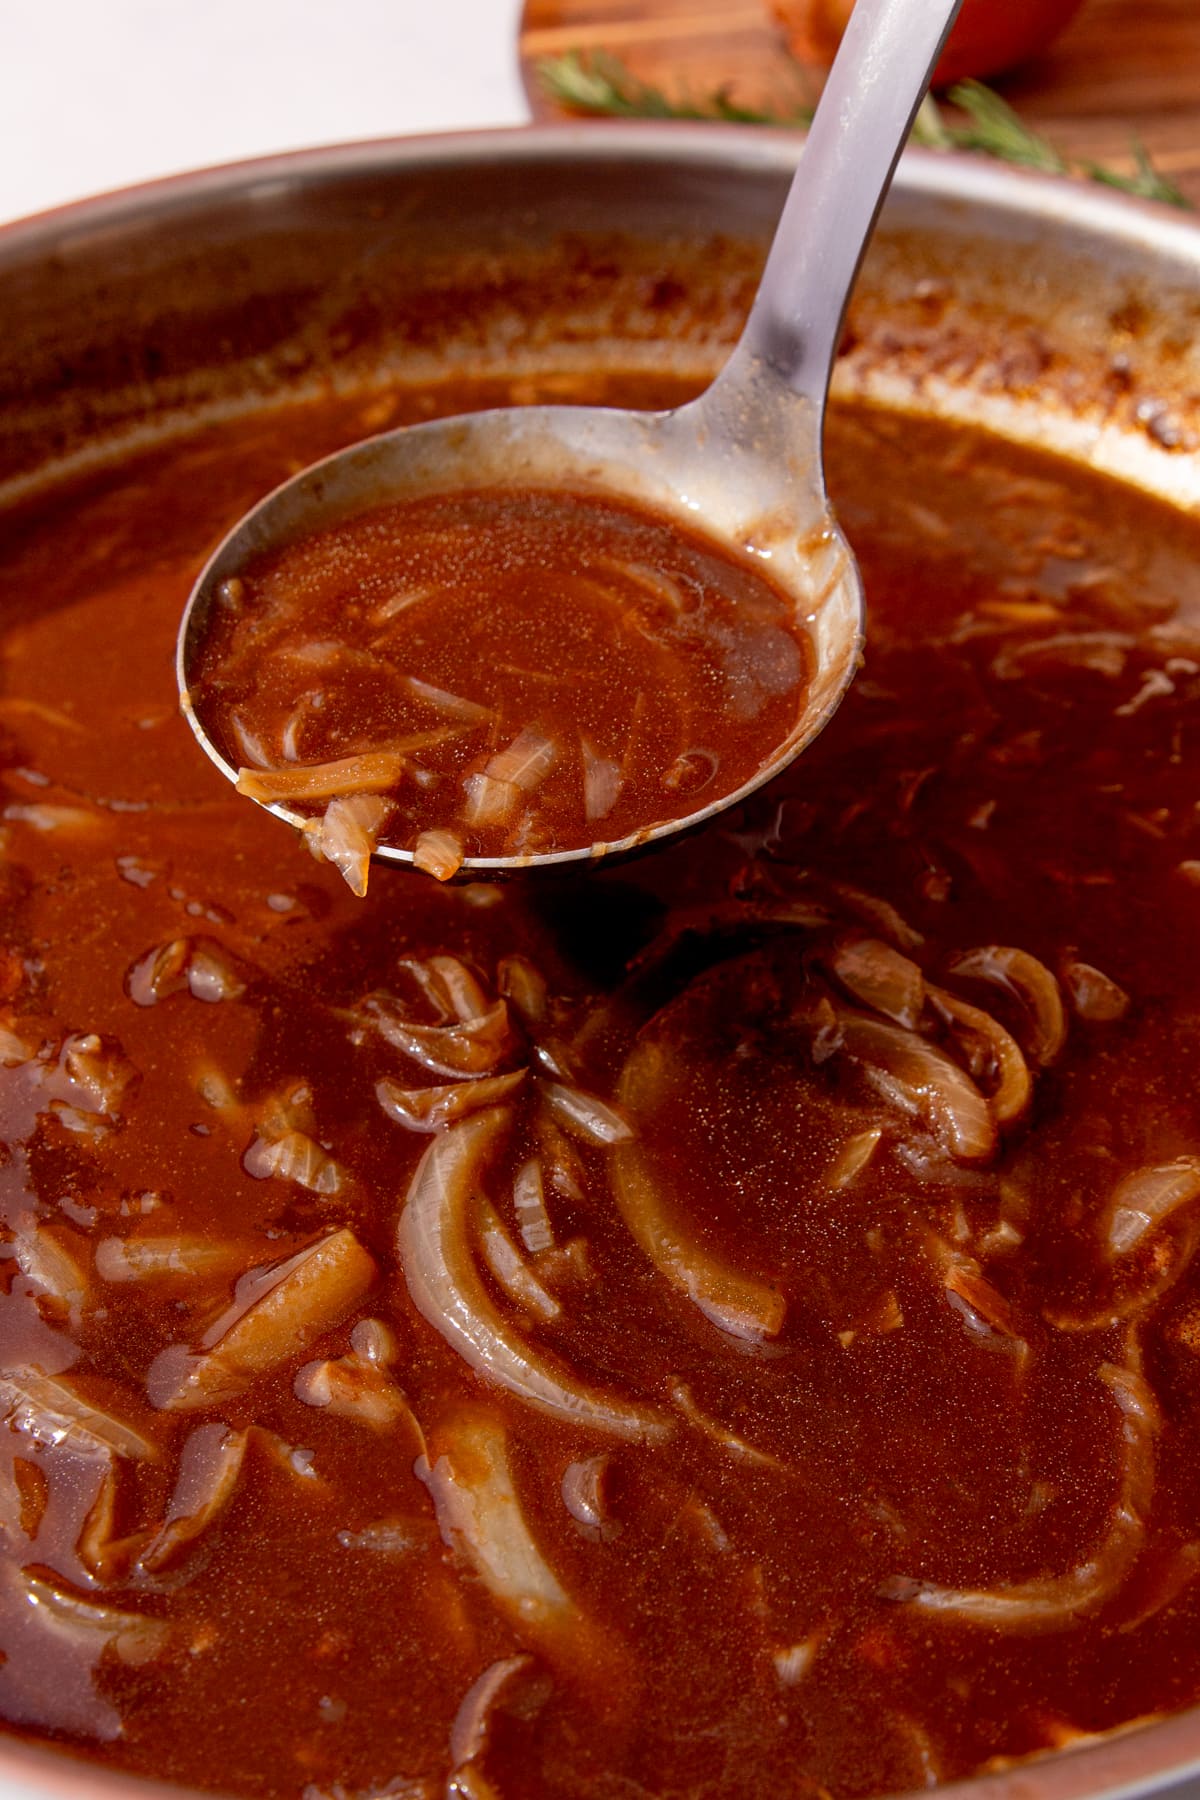 Gravy with onions in a large metal pan with a ladle filled with gravy and onions.